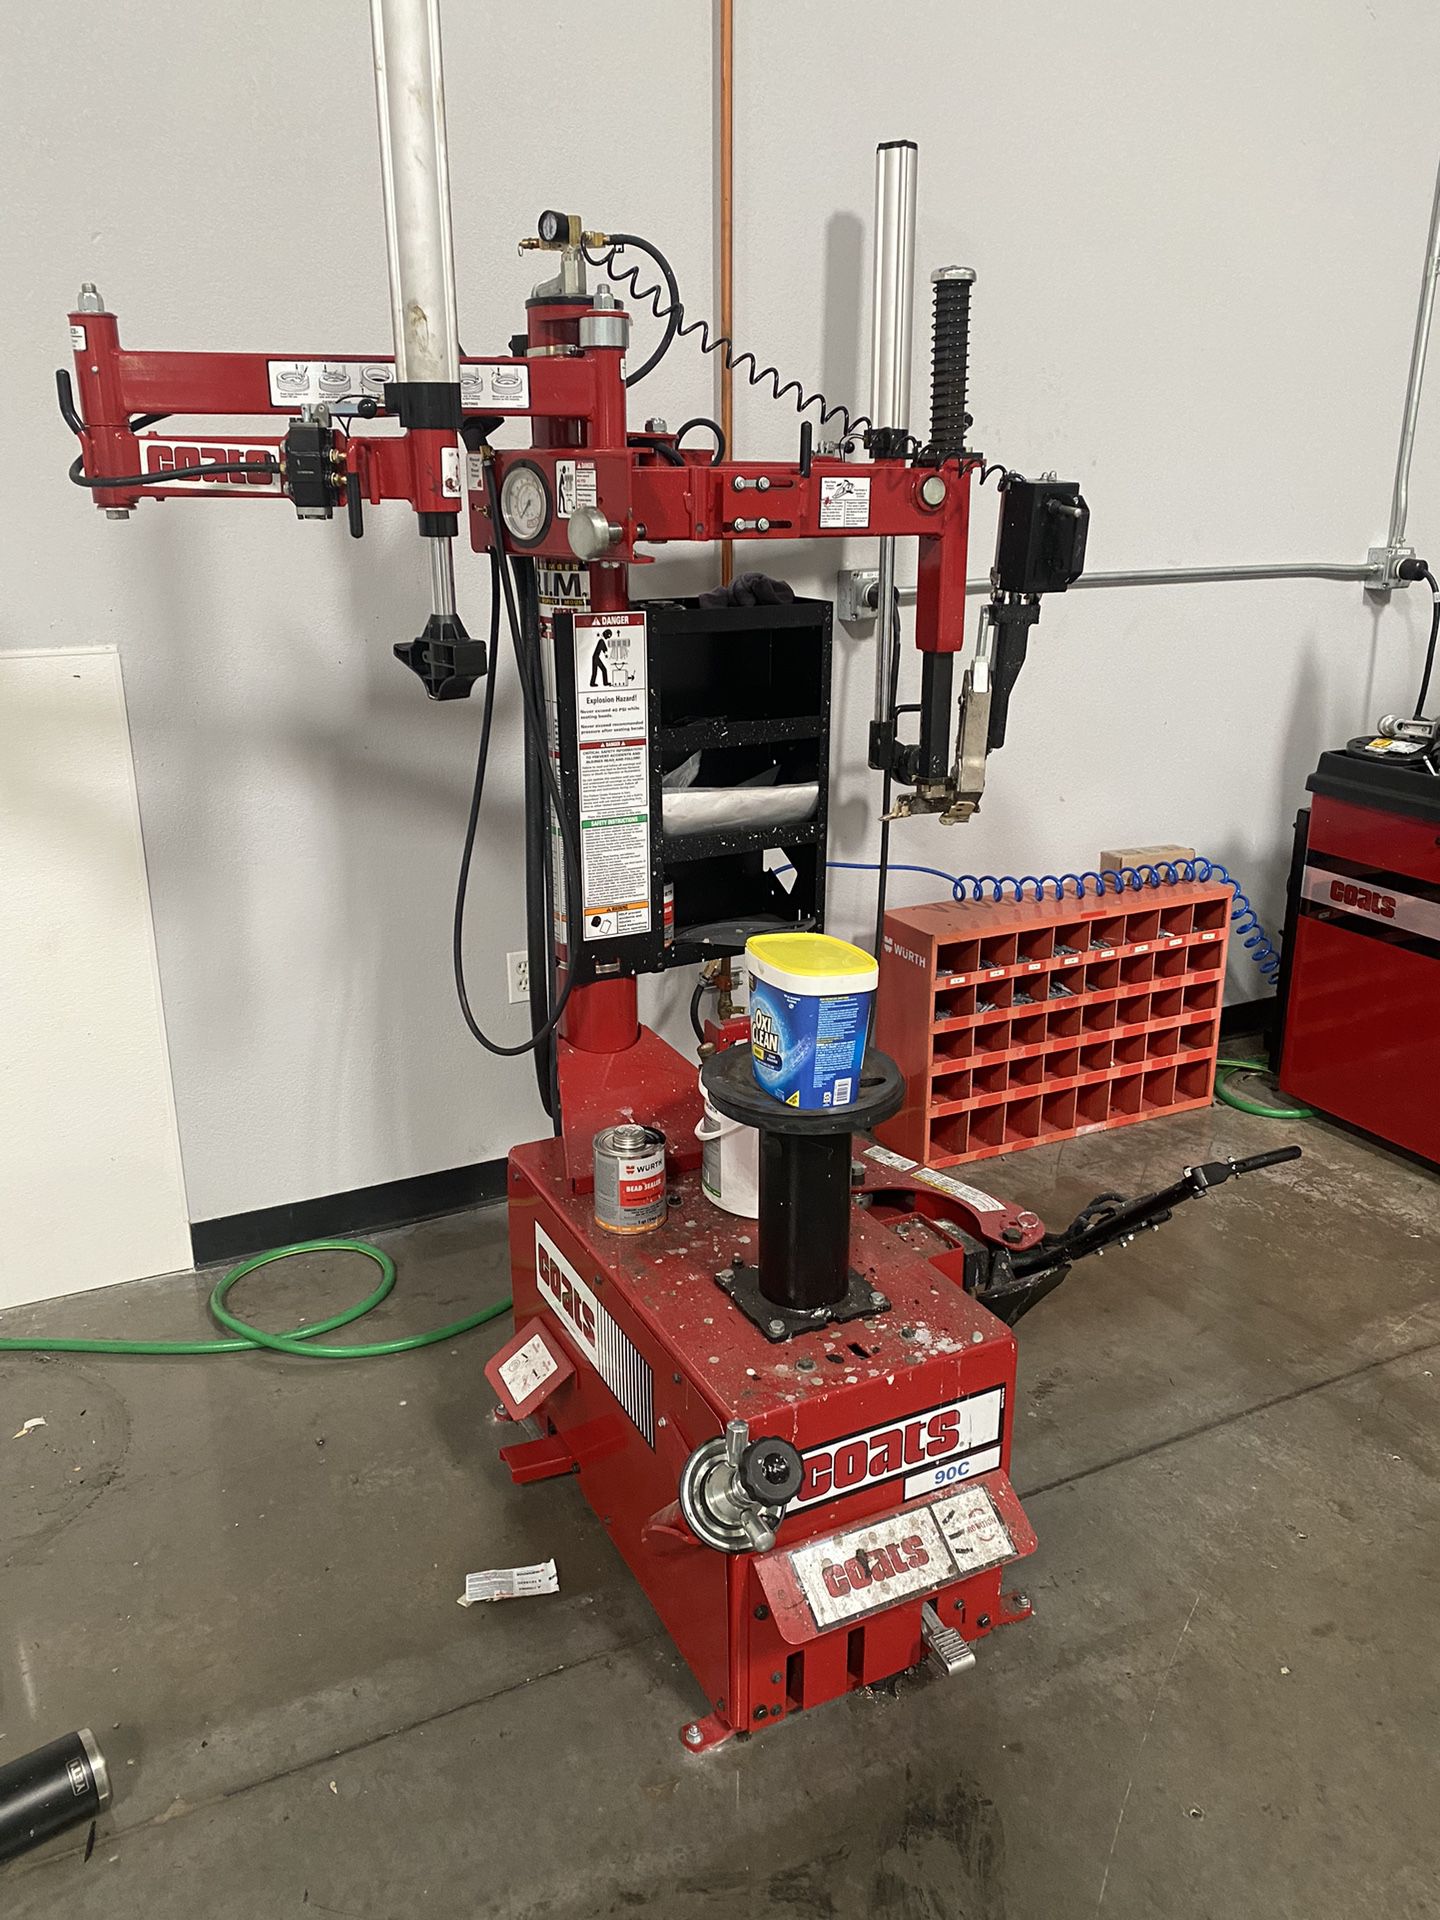 Coats Tire Changer Tire Machine Works Great Like New Shop Equipment 